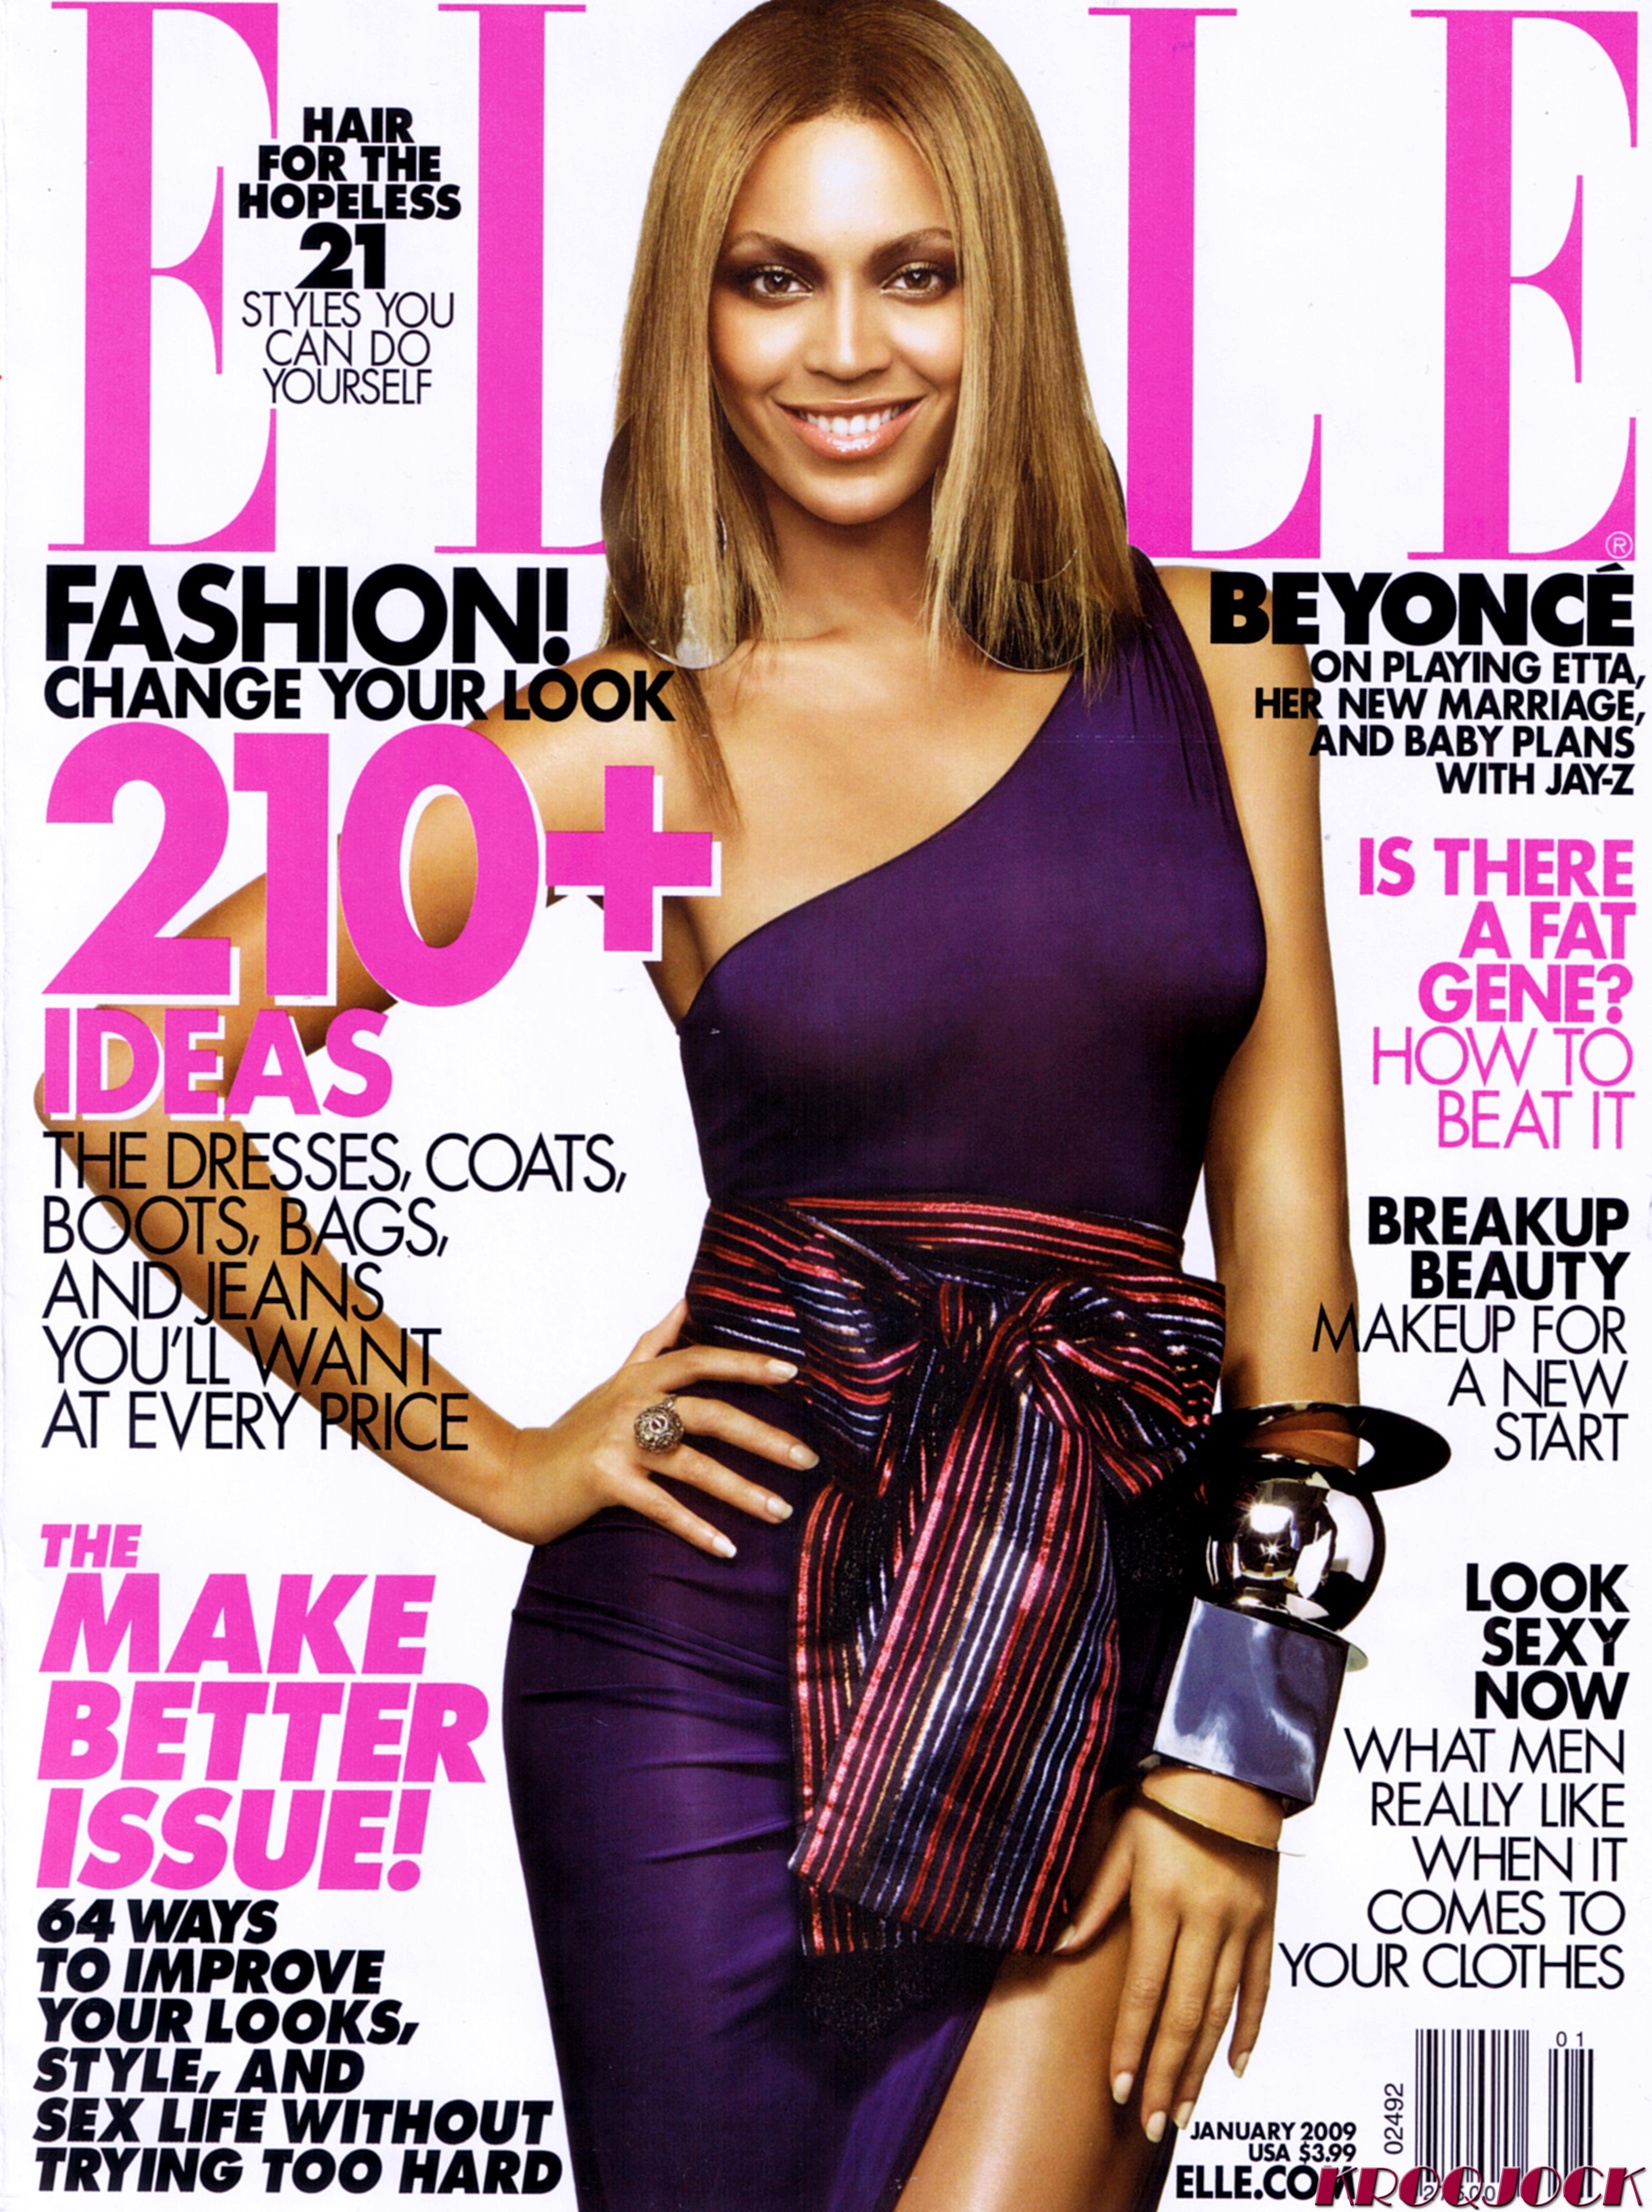 Beyonce Knowles photo 4022 of 7892 pics, wallpaper - photo #667287 ...